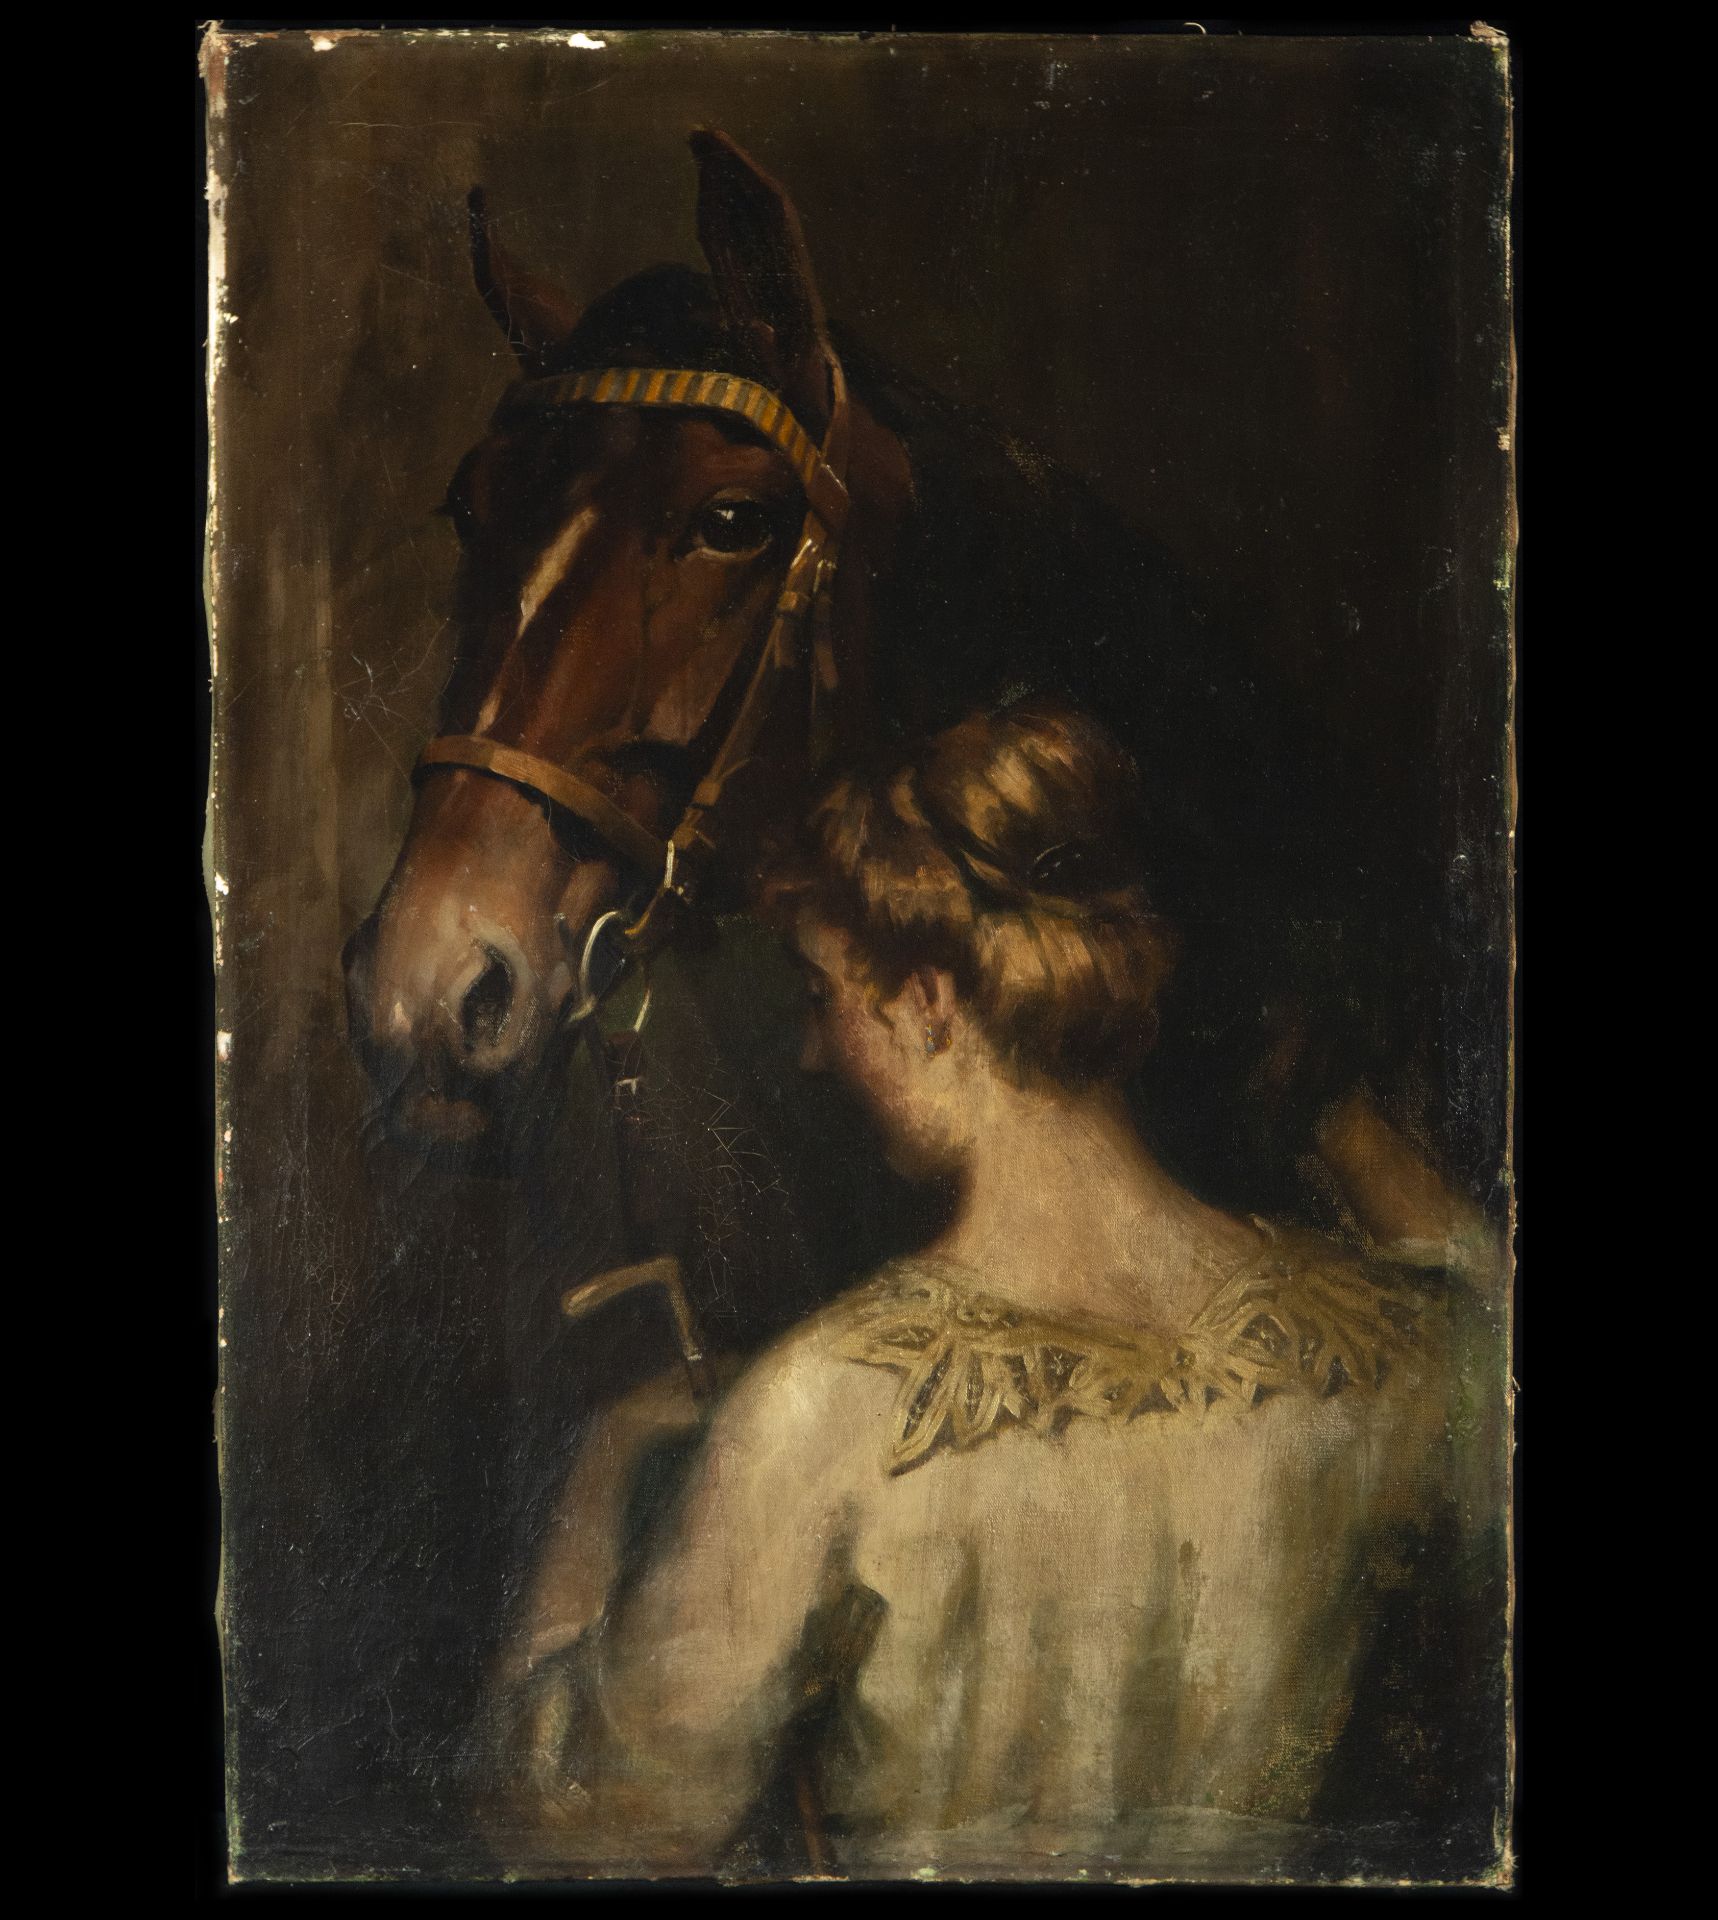 Lady next to a horse, Romanticist school of the late 19th century